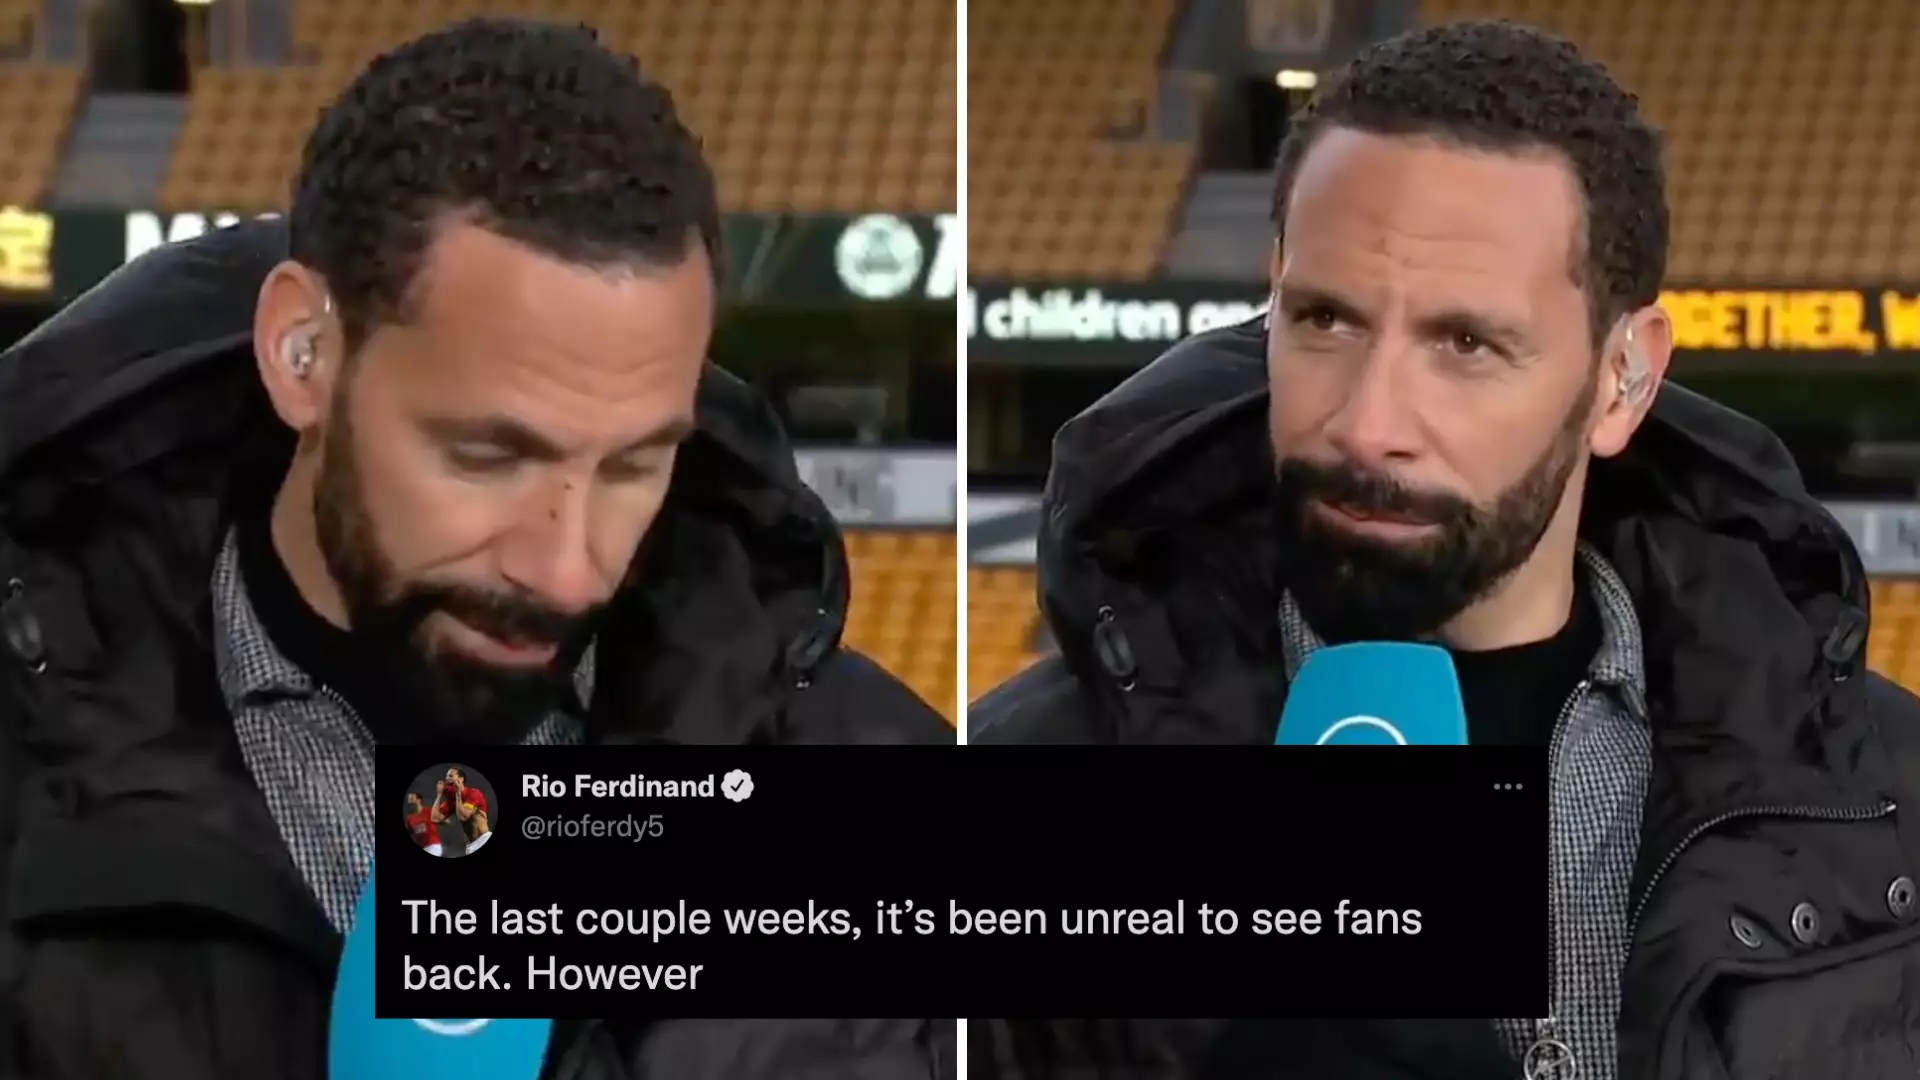 Rio Ferdinand Claims Wolves Fan Racially Abused Him With 'Monkey Chant' During Man United Match